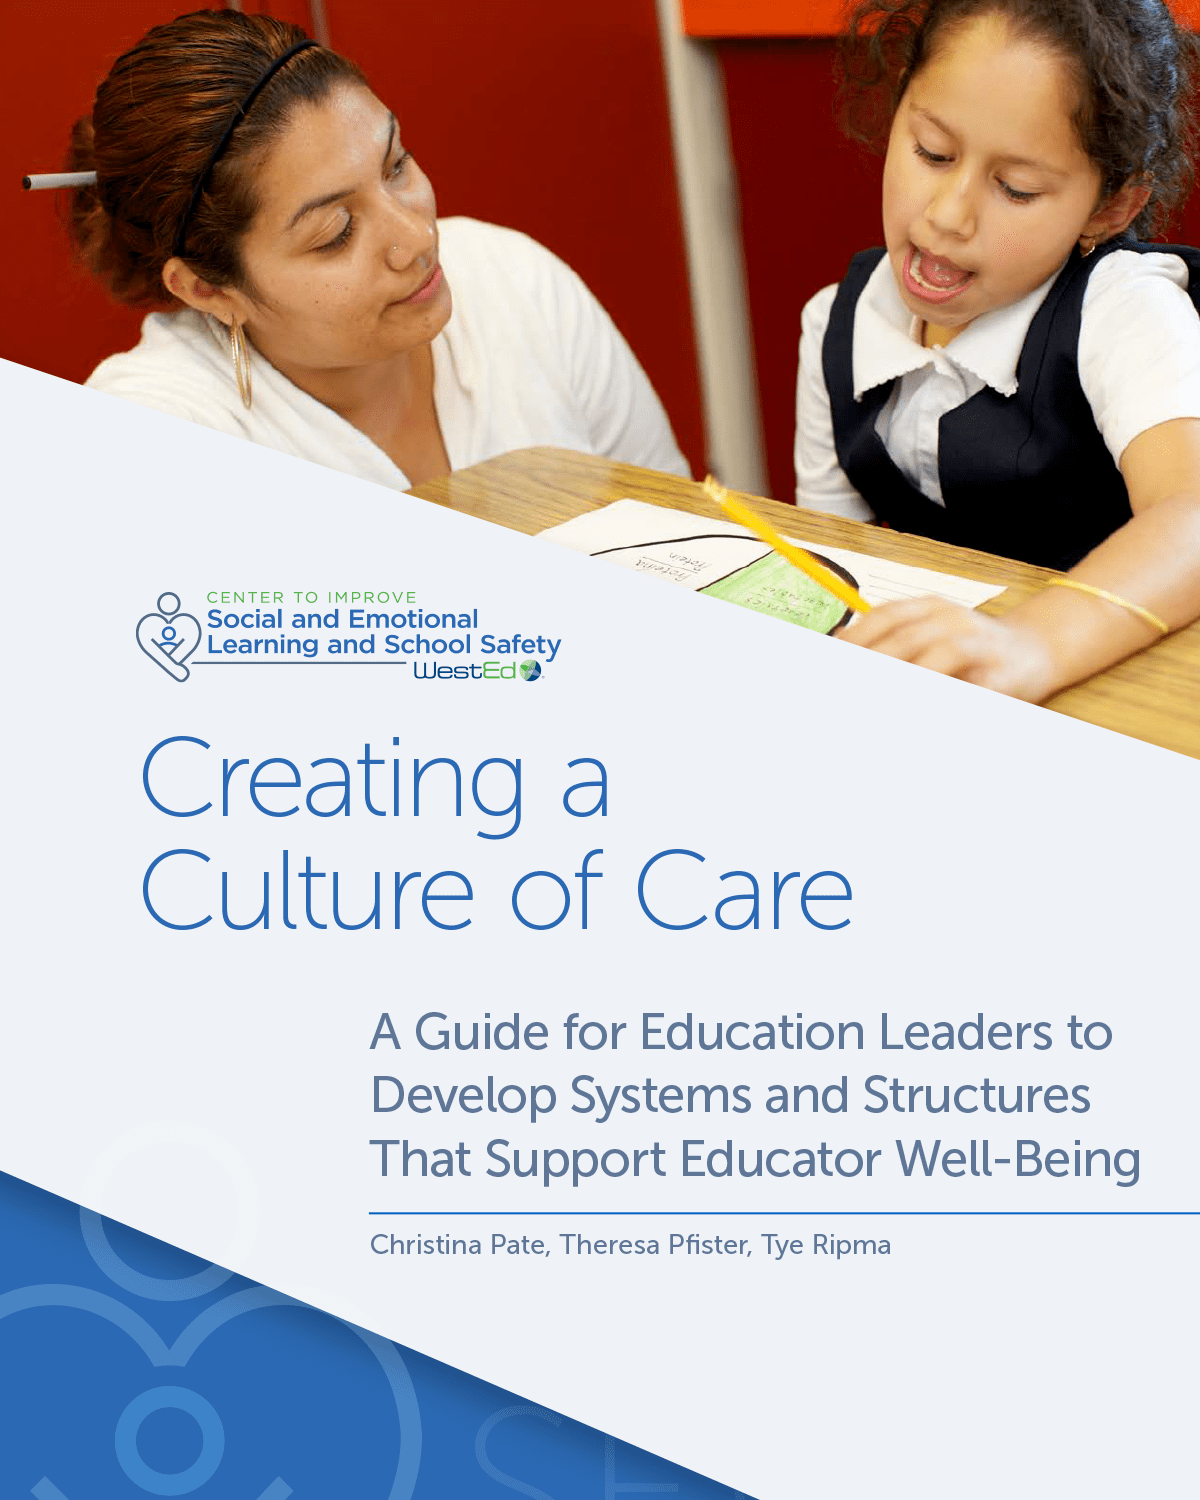 Creating a Culture of Care: A Guide for Education Leaders to Develop Systems and Structures That Support Educator Well-Being